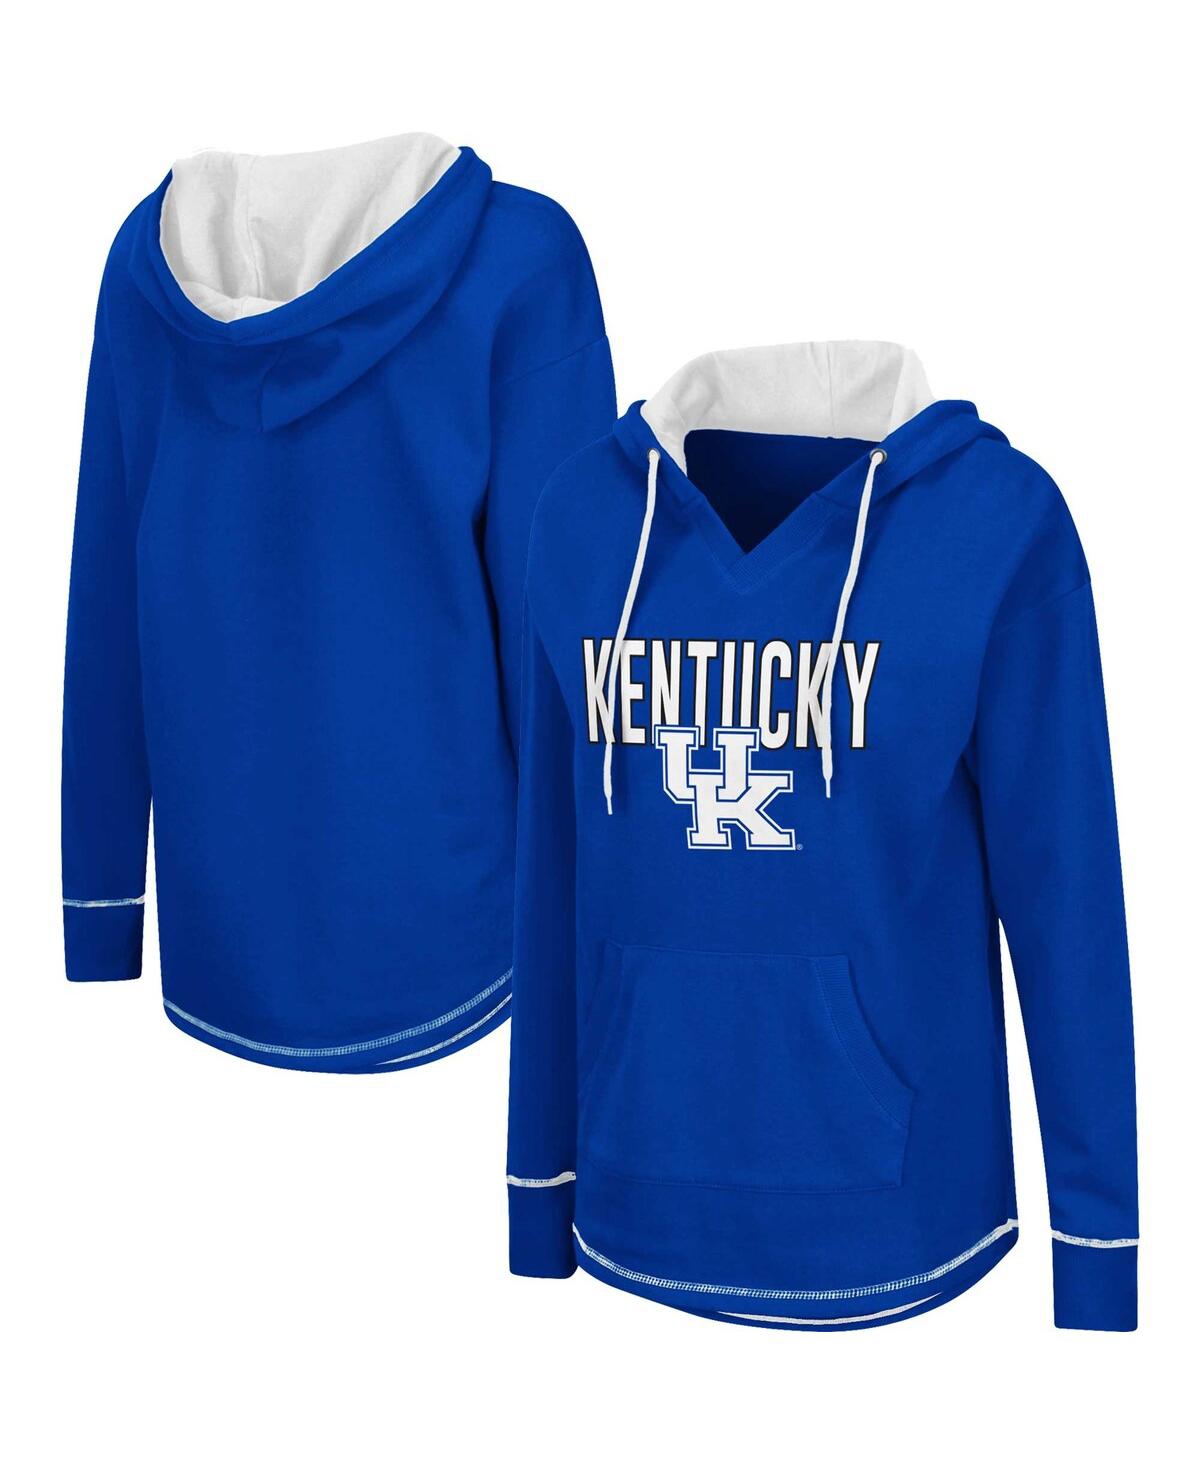 Women's Colosseum Royal Kentucky Wildcats Tunic Pullover V-Neck Hoodie - Royal